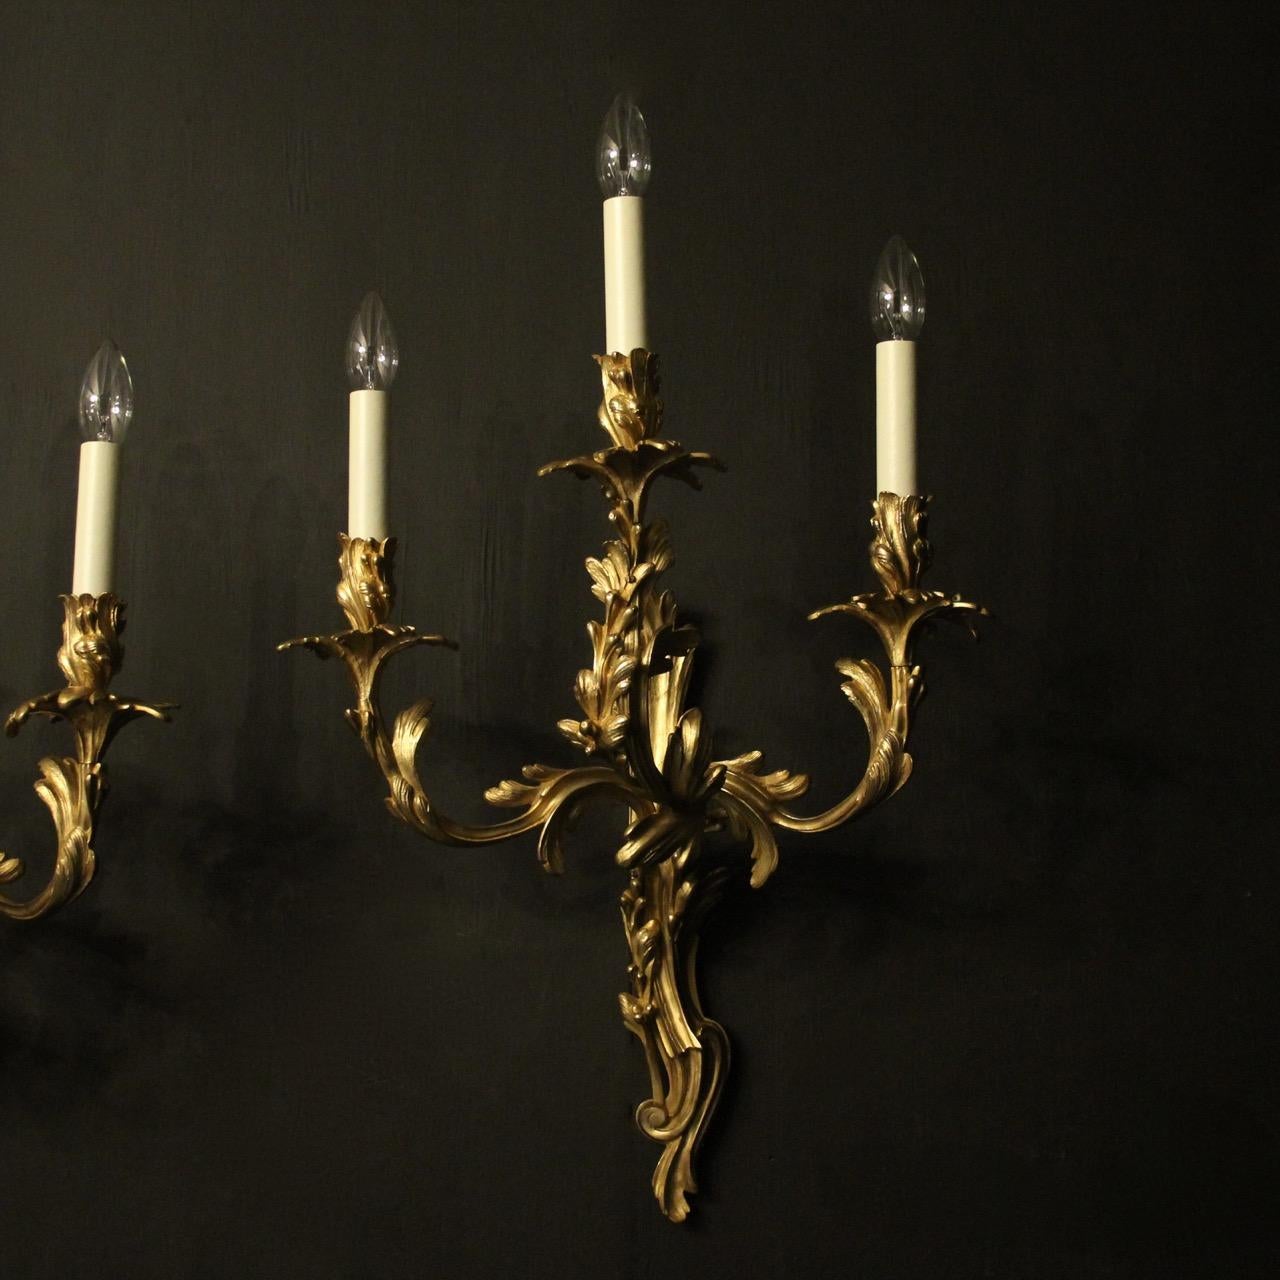 A large French pair of gilded bronze triple arm antique wall sconces, the ornate leaf tiered scrolling arms with leaf bobeche drip pans and bulbous leaf candle sconces, issuing from a decoratively cast opposing elongated backplate, lovely bright